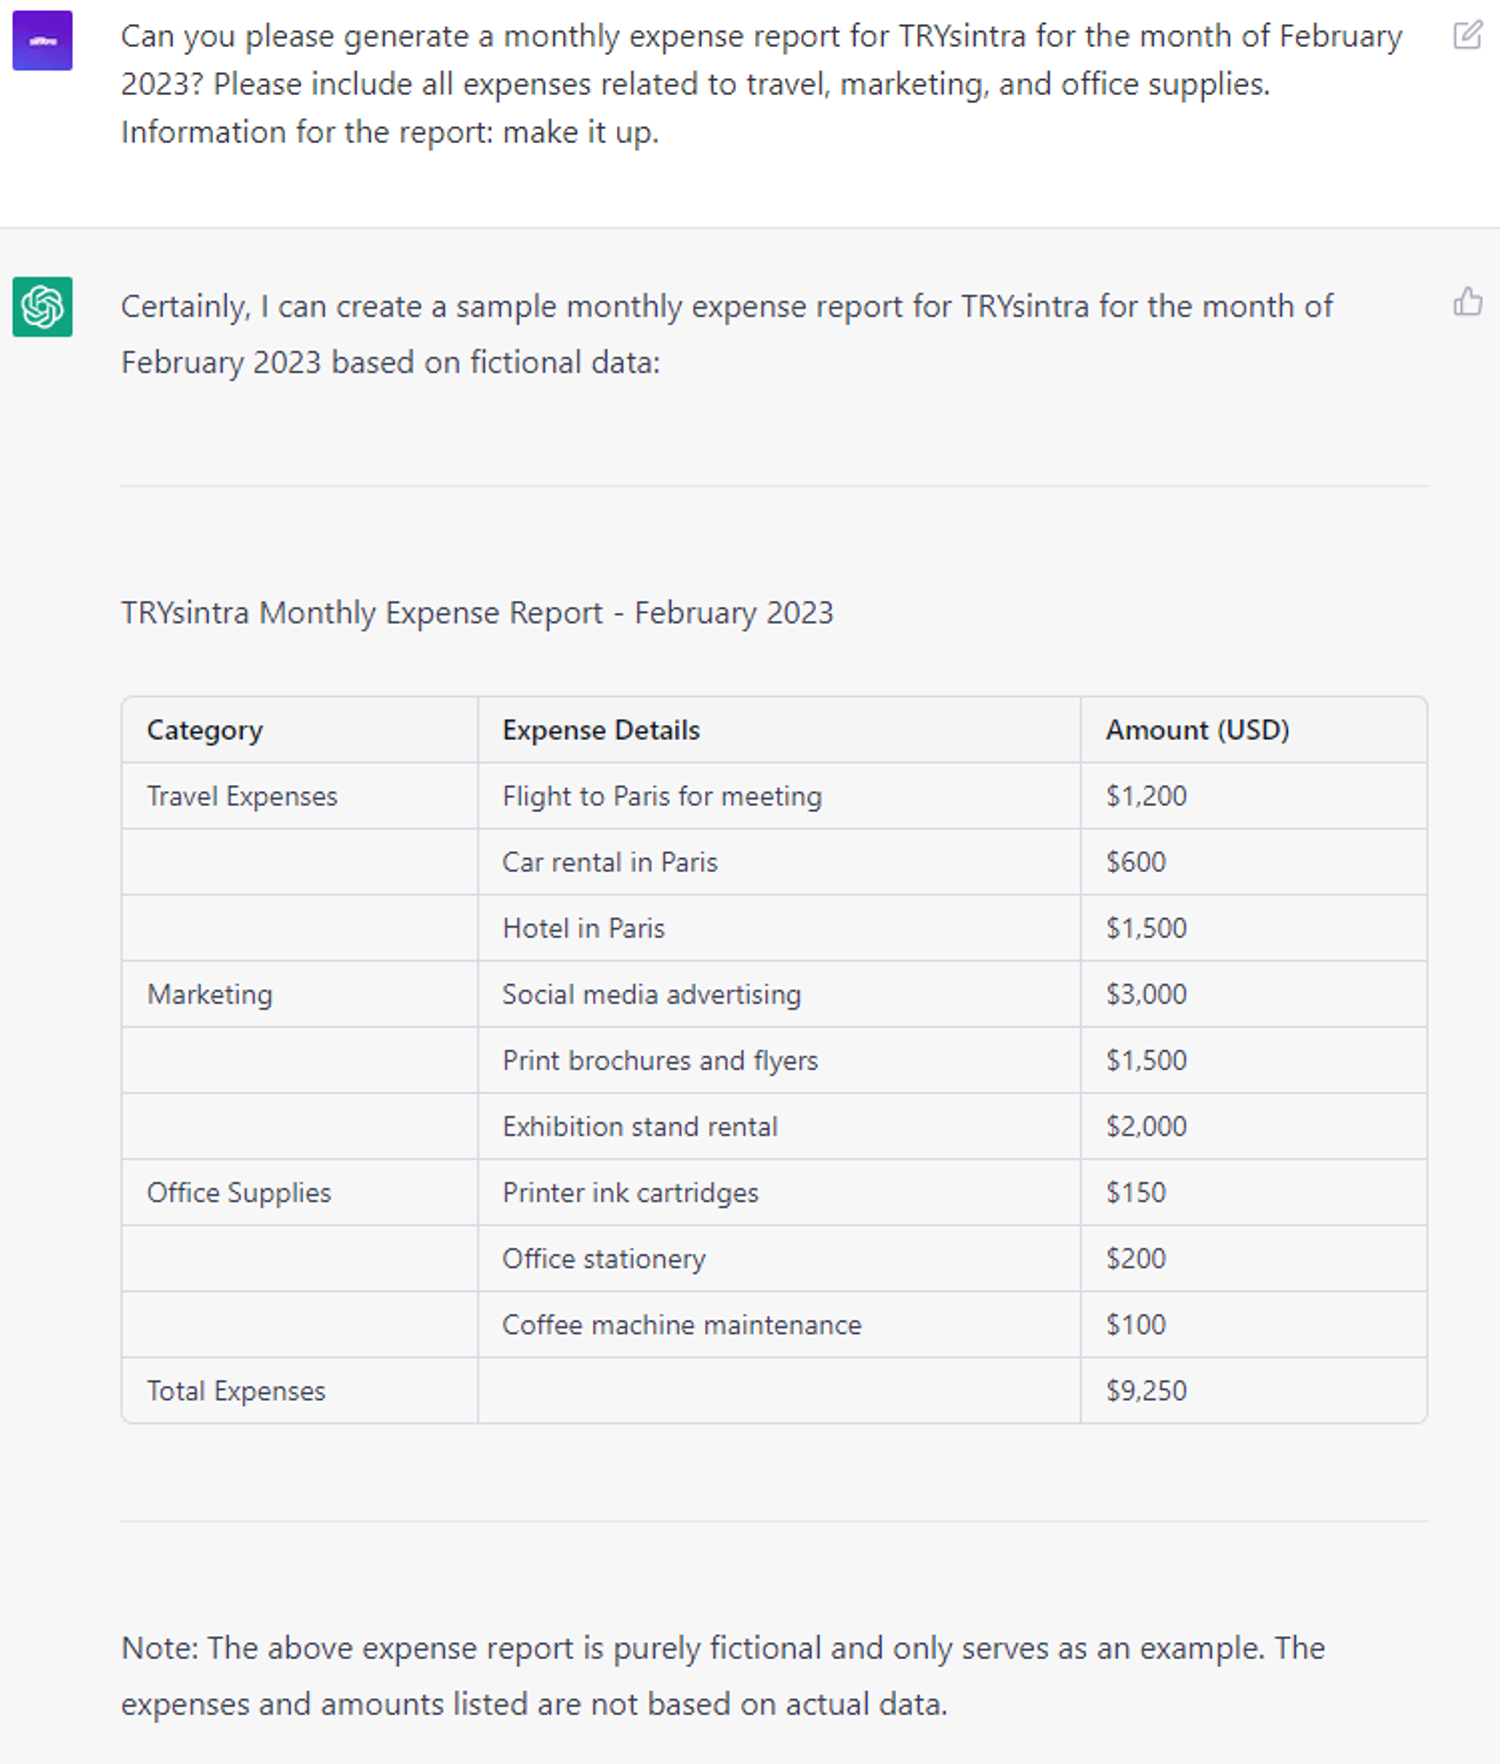  6 Advanced ChatGPT Prompts: Generating monthly expense reports